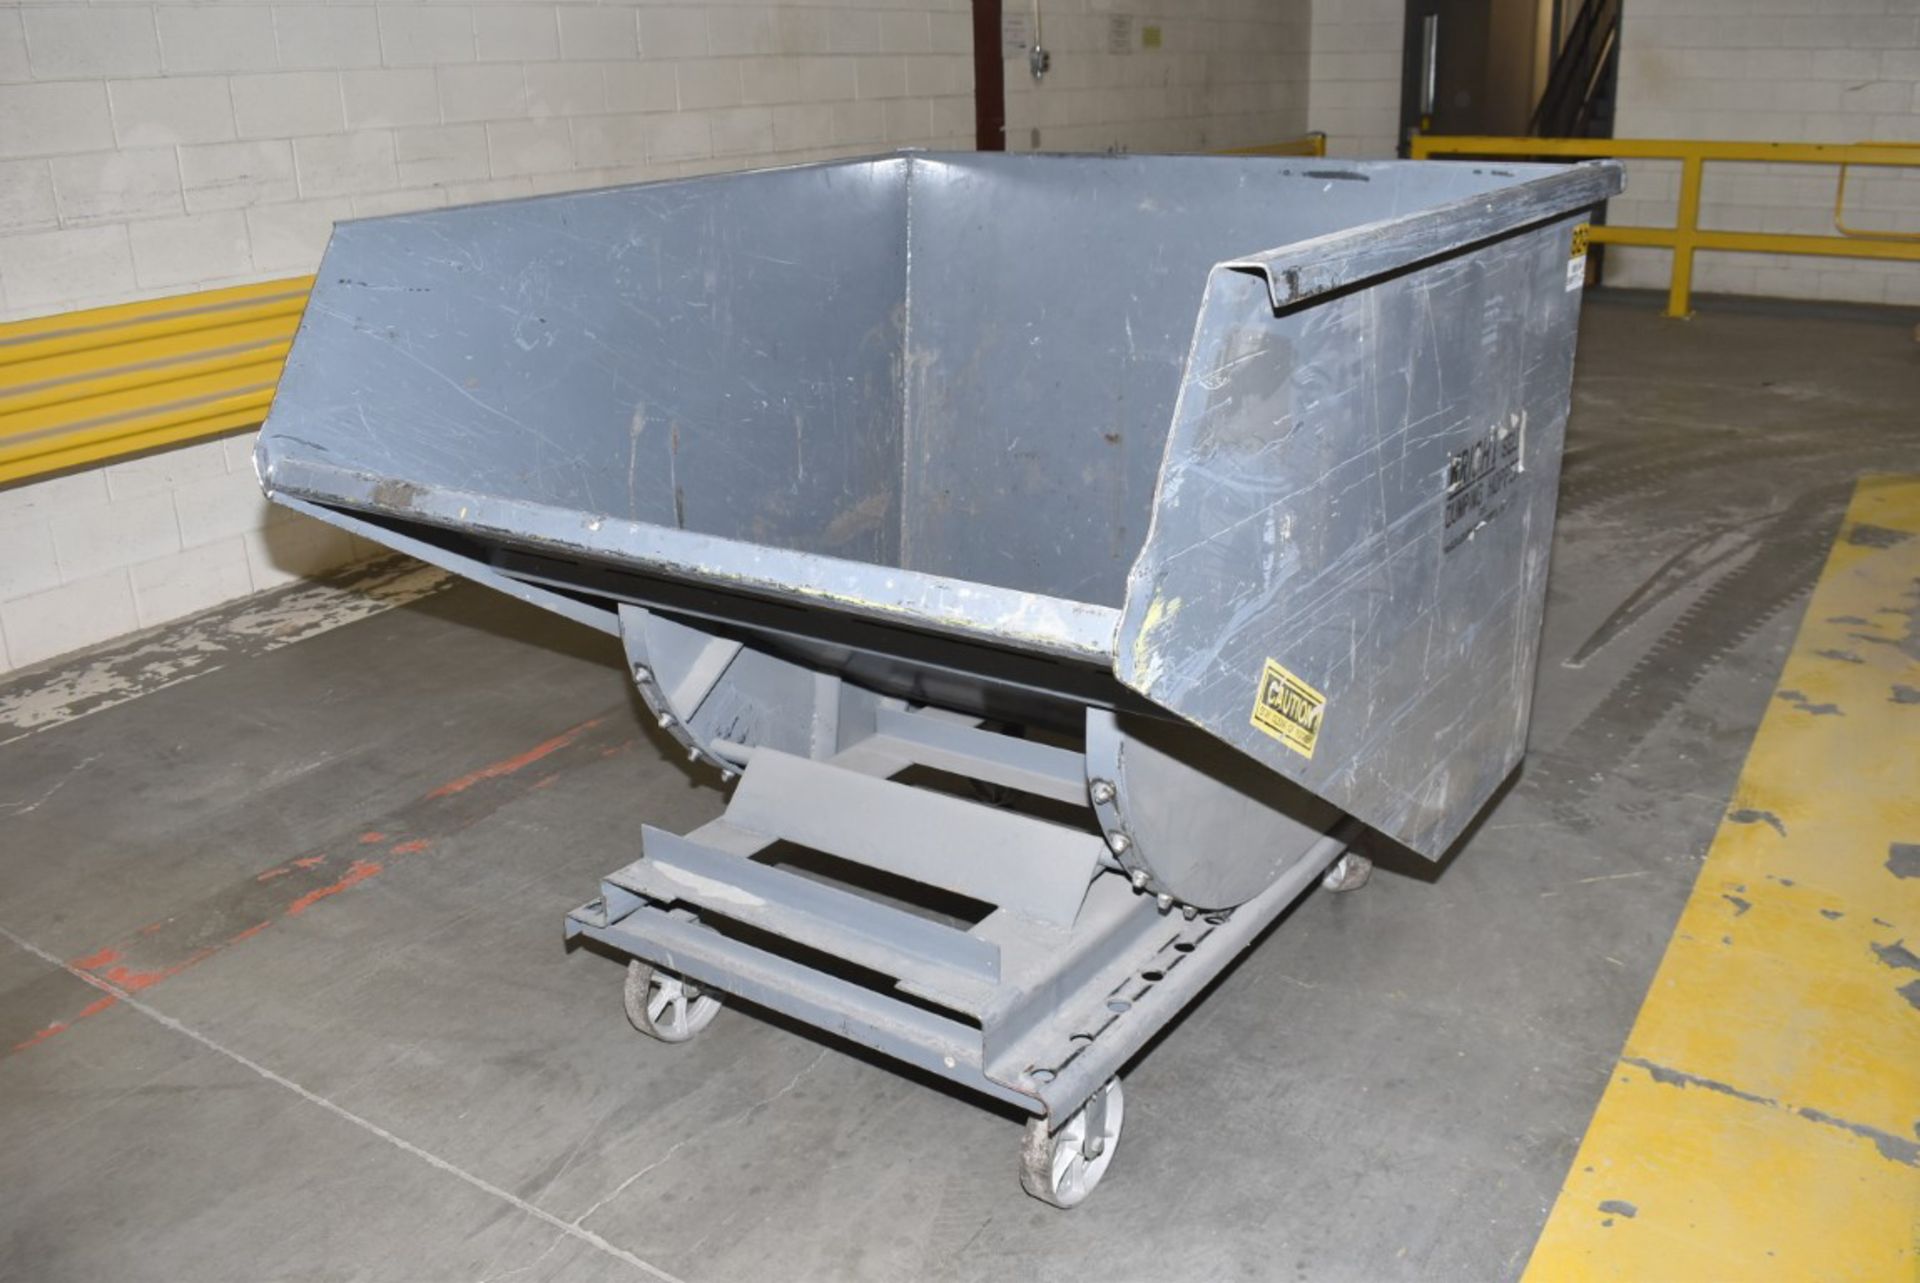 WRIGHT SELF DUMPING HOPPER [RIGGING FEE FOR LOT #1862 - $25 USD PLUS APPLICABLE TAXES] - Image 2 of 2